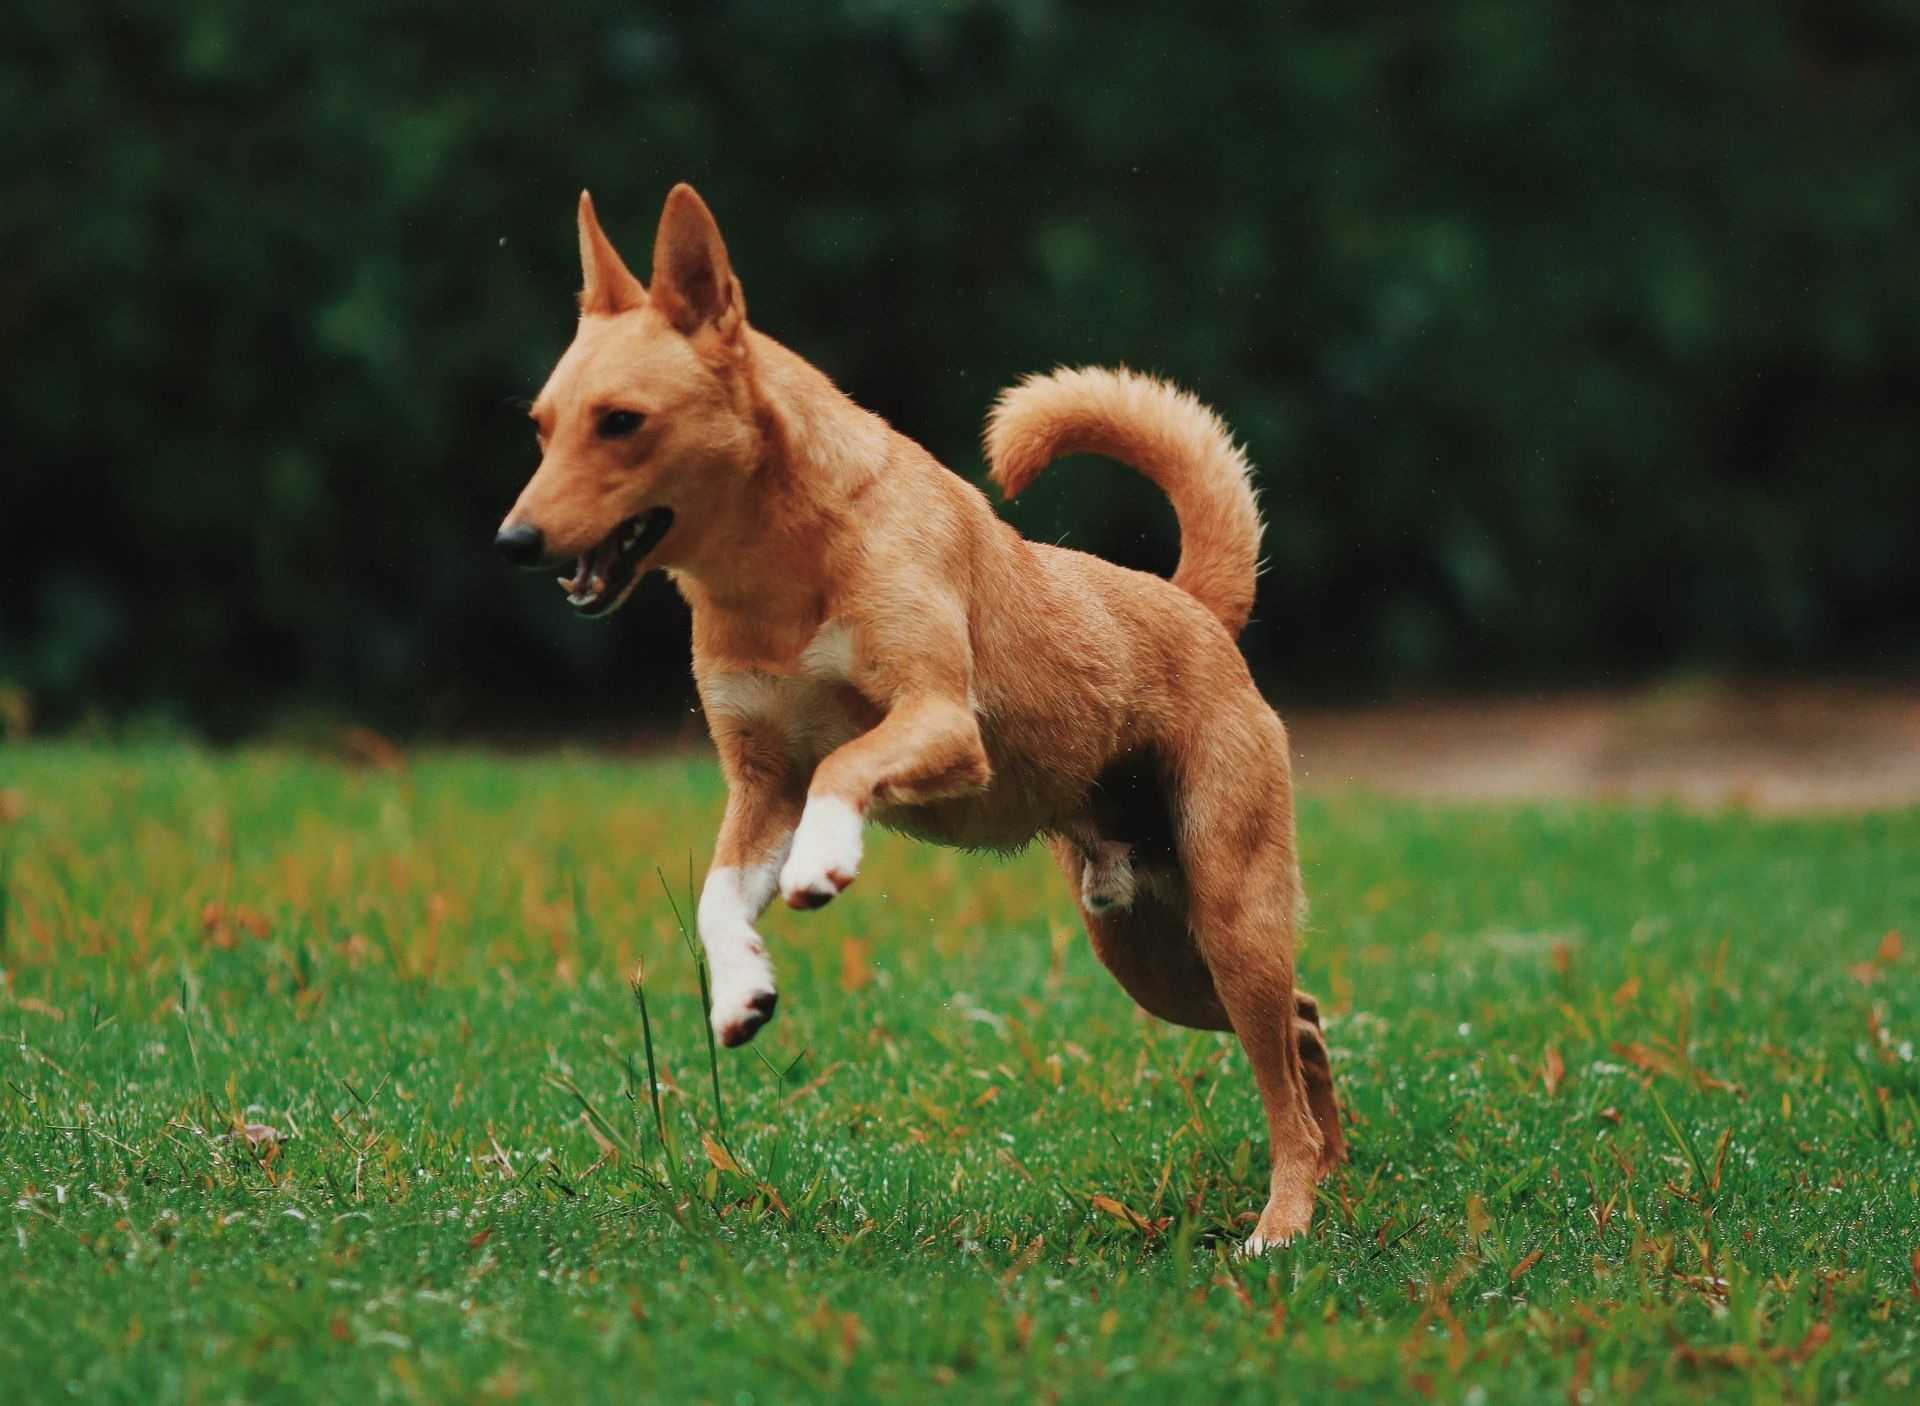 A brown and white dog is running in the grass.